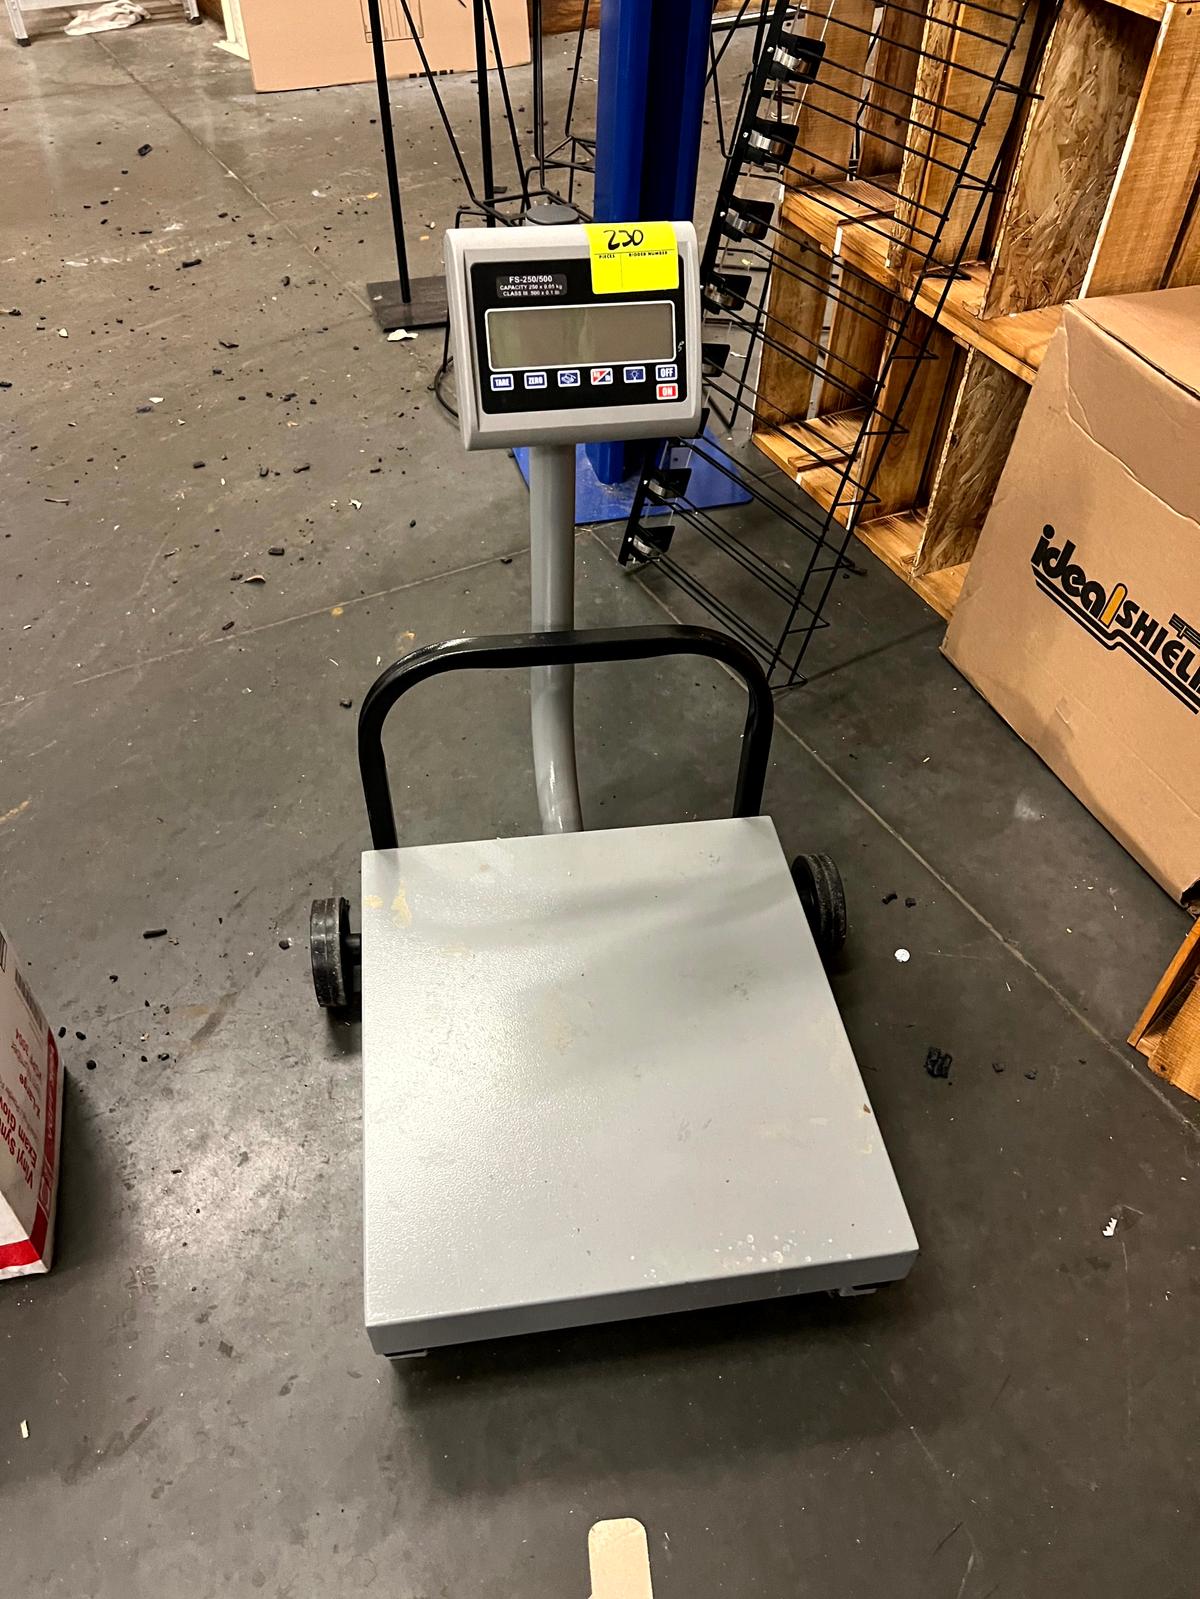 250/500LBS Scale